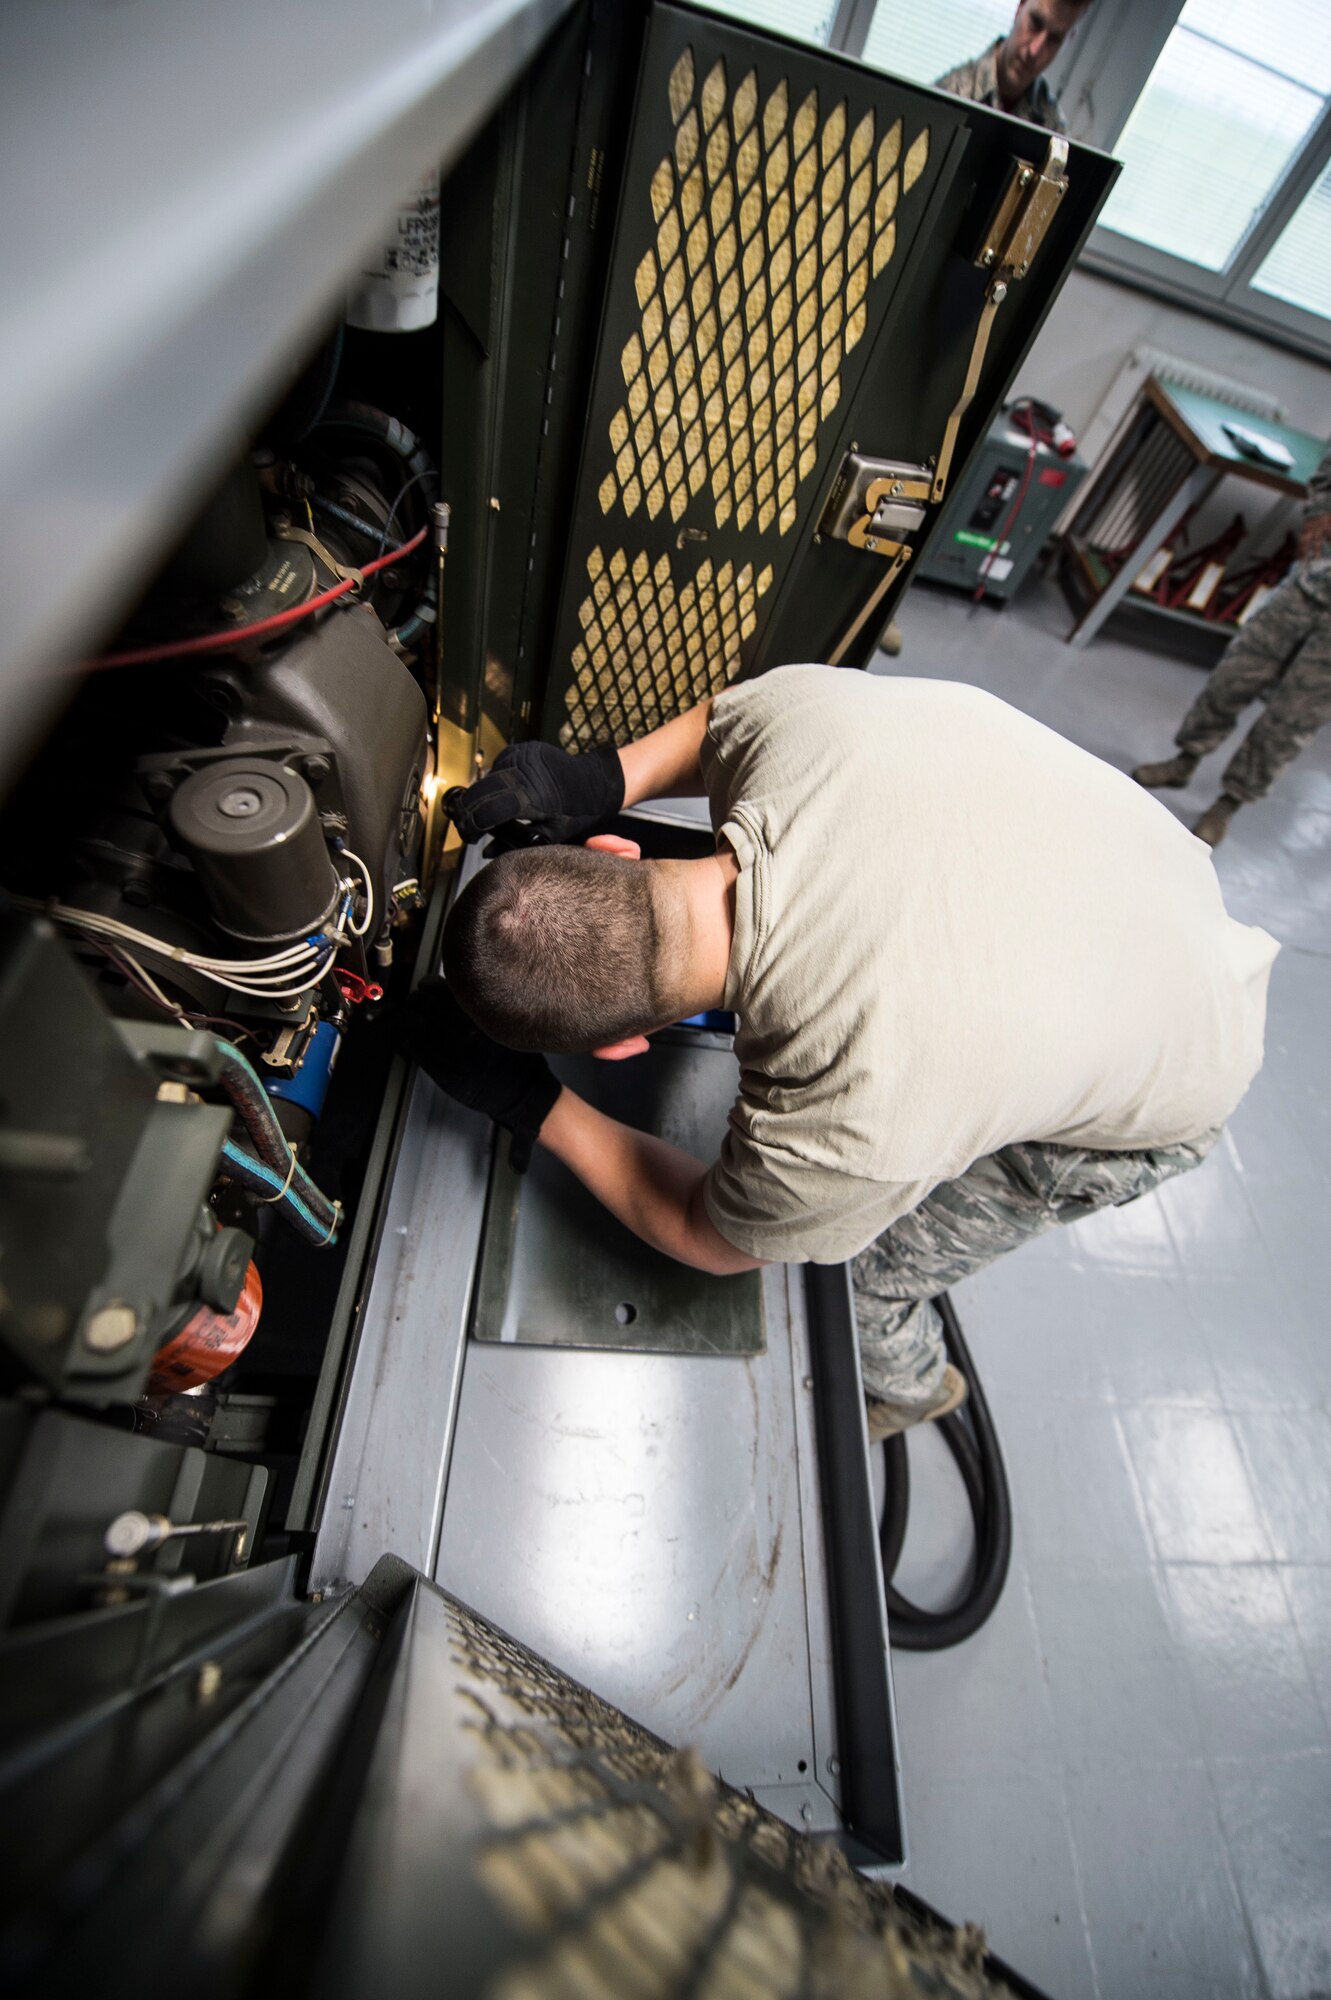 Staff Sgt. Andrew Bublik, 424th Air Base Squadron aerospace ground equipment craftsman, performs a phase inspection on a diesel generator used to power aircraft at Chièvres Air Base, Belgium, Feb. 26, 2016. AGE is one of the 18 career fields employed in the squadron that functions as the senior airfield authority for the airfield on behalf of the U.S. (U.S. Air Force photo/Staff Sgt. Sara Keller)